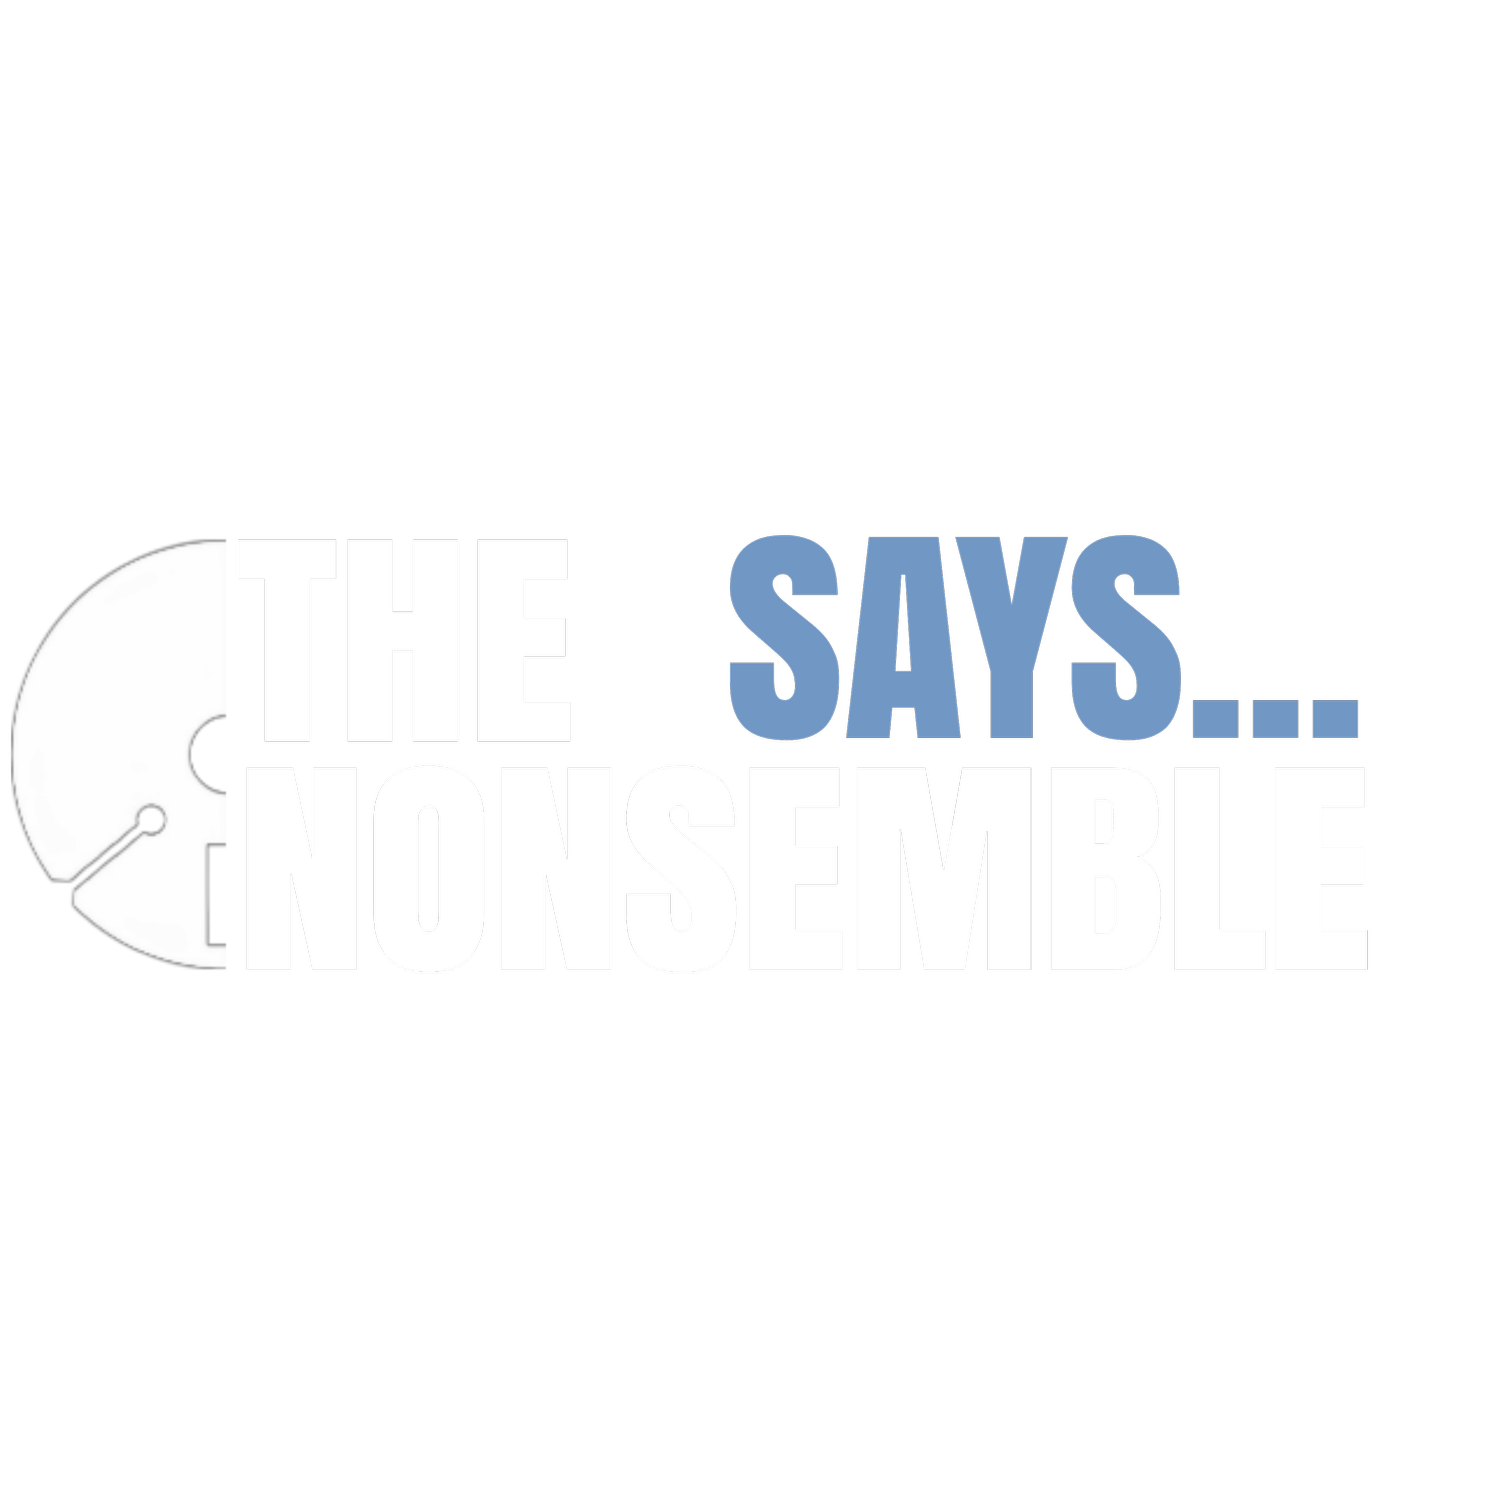 THE NONSEMBLE :: [+]AZZ-IS